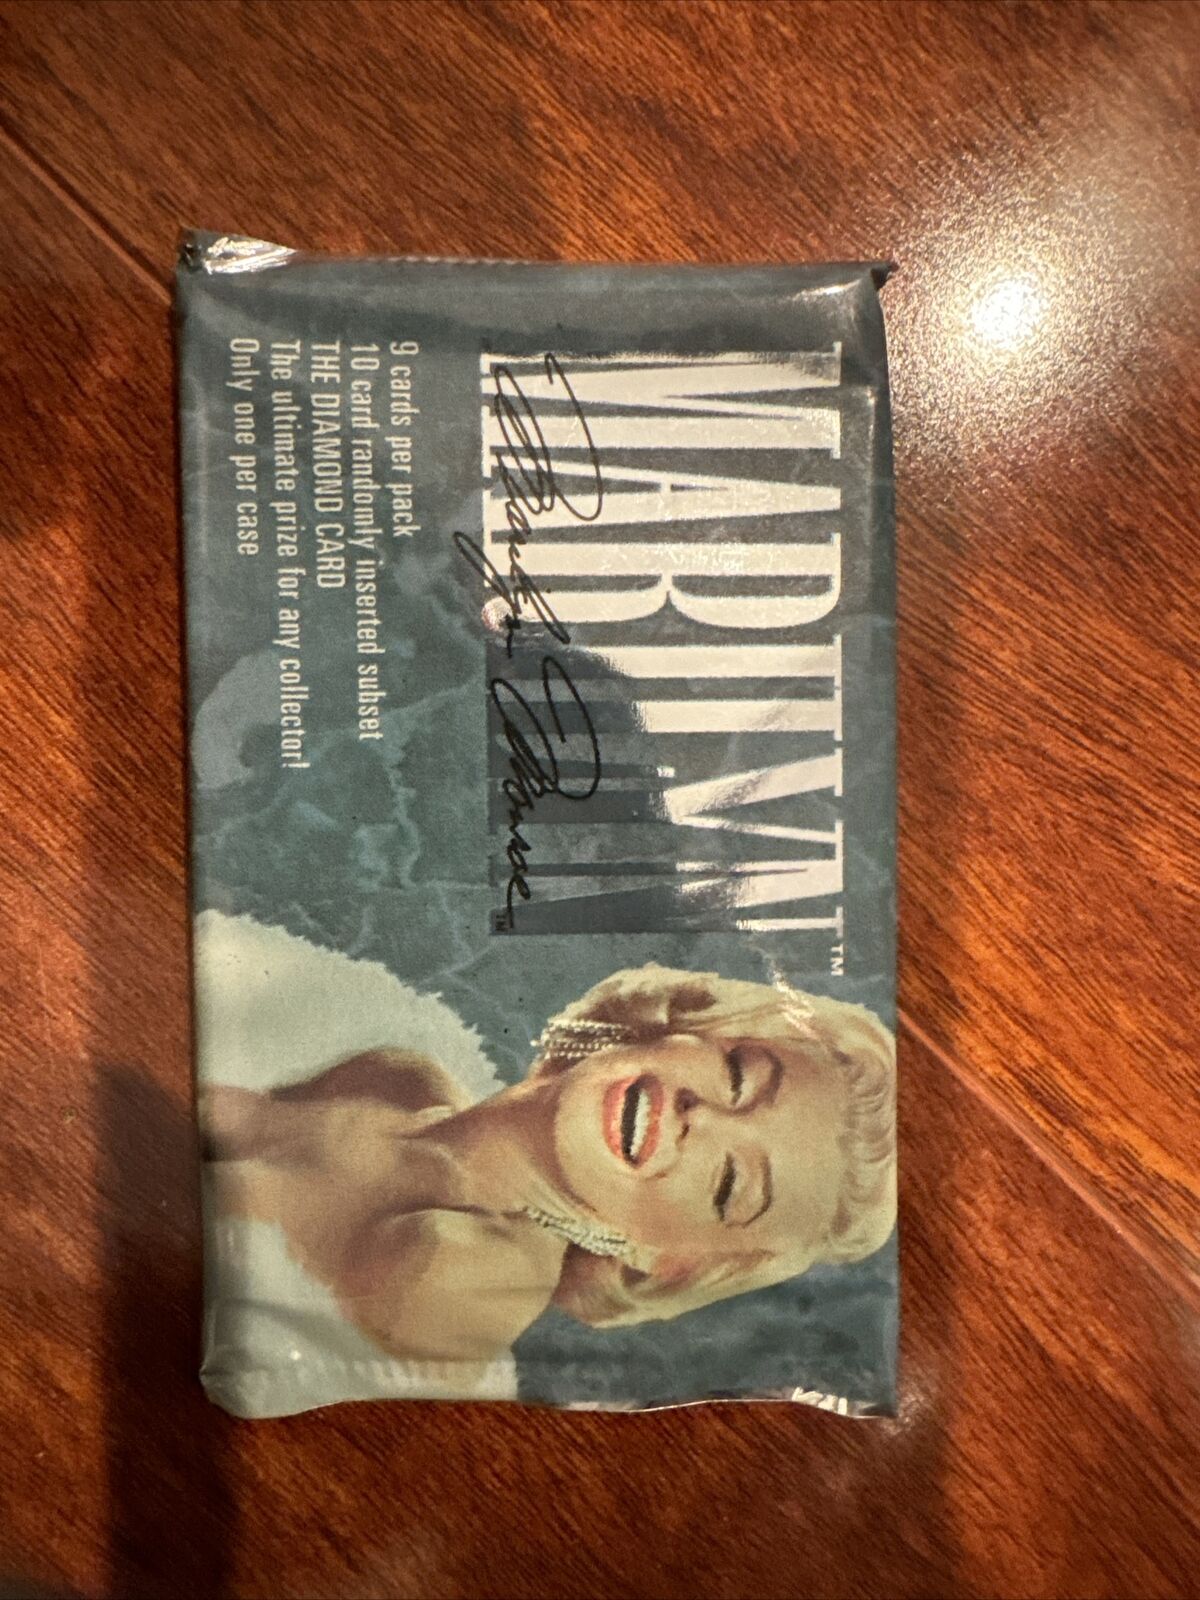 NEW SEALED PACK OF MARILYN MONROE TRADING CARDS THE DIAMOND CARD 1993